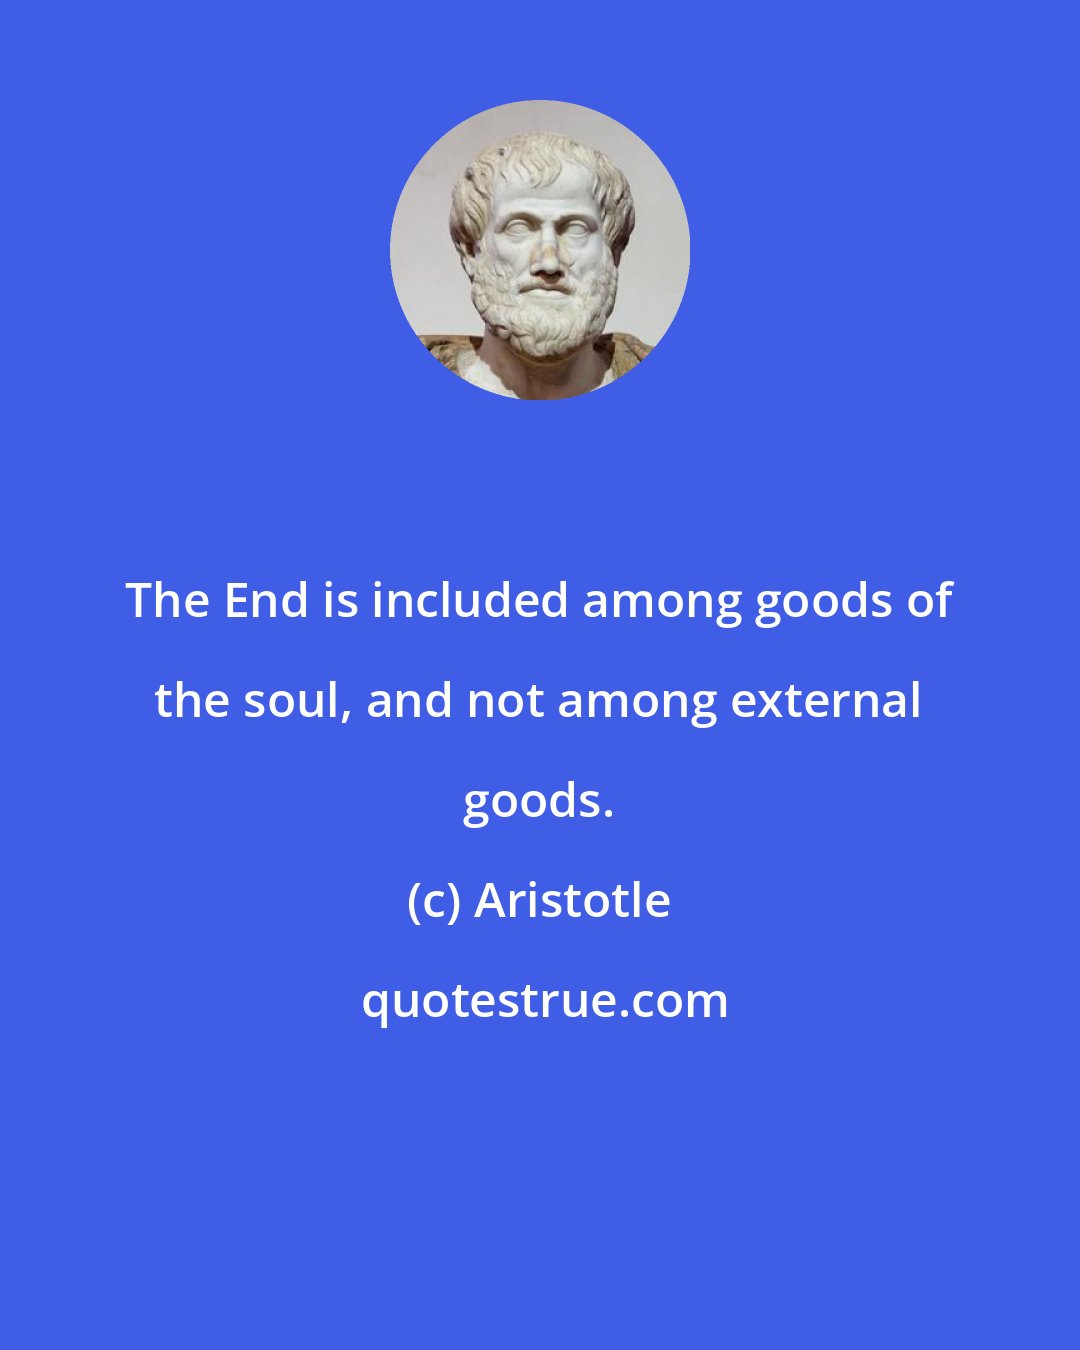 Aristotle: The End is included among goods of the soul, and not among external goods.